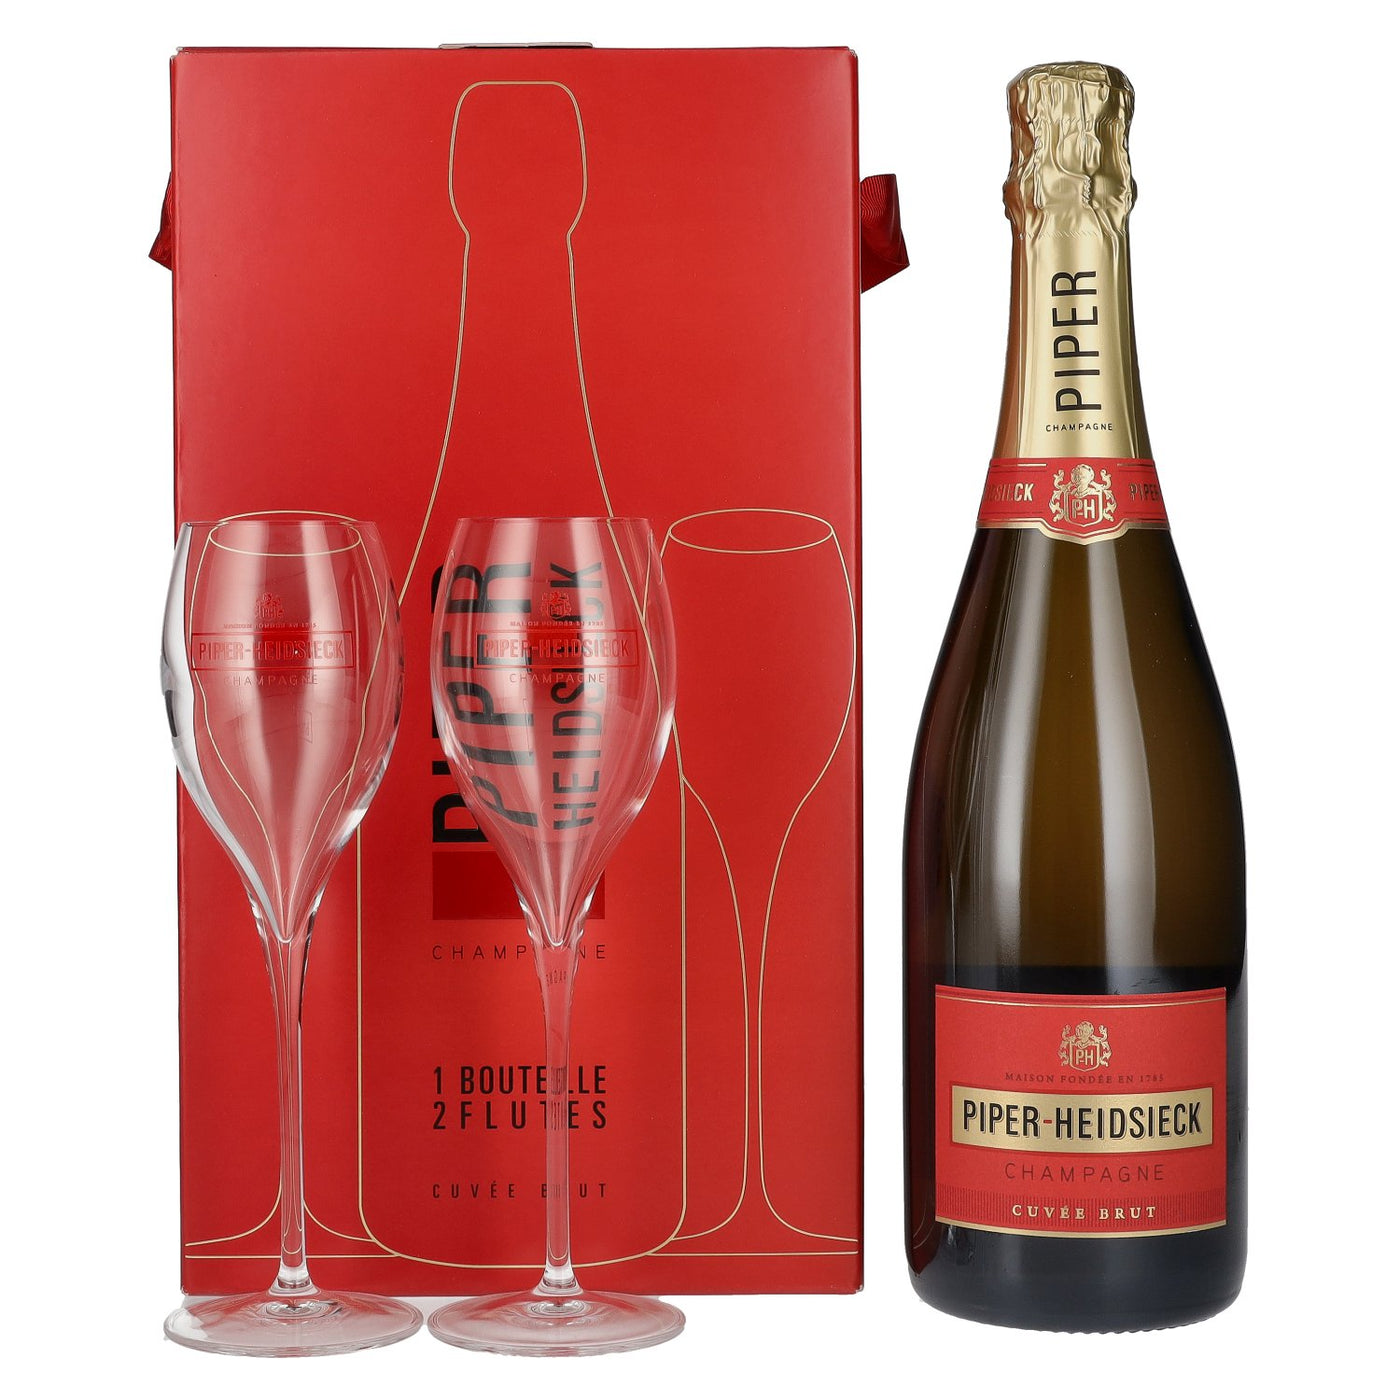 BUY] Brut Piper-Heidsieck at | Cuvee Glasses with NV -